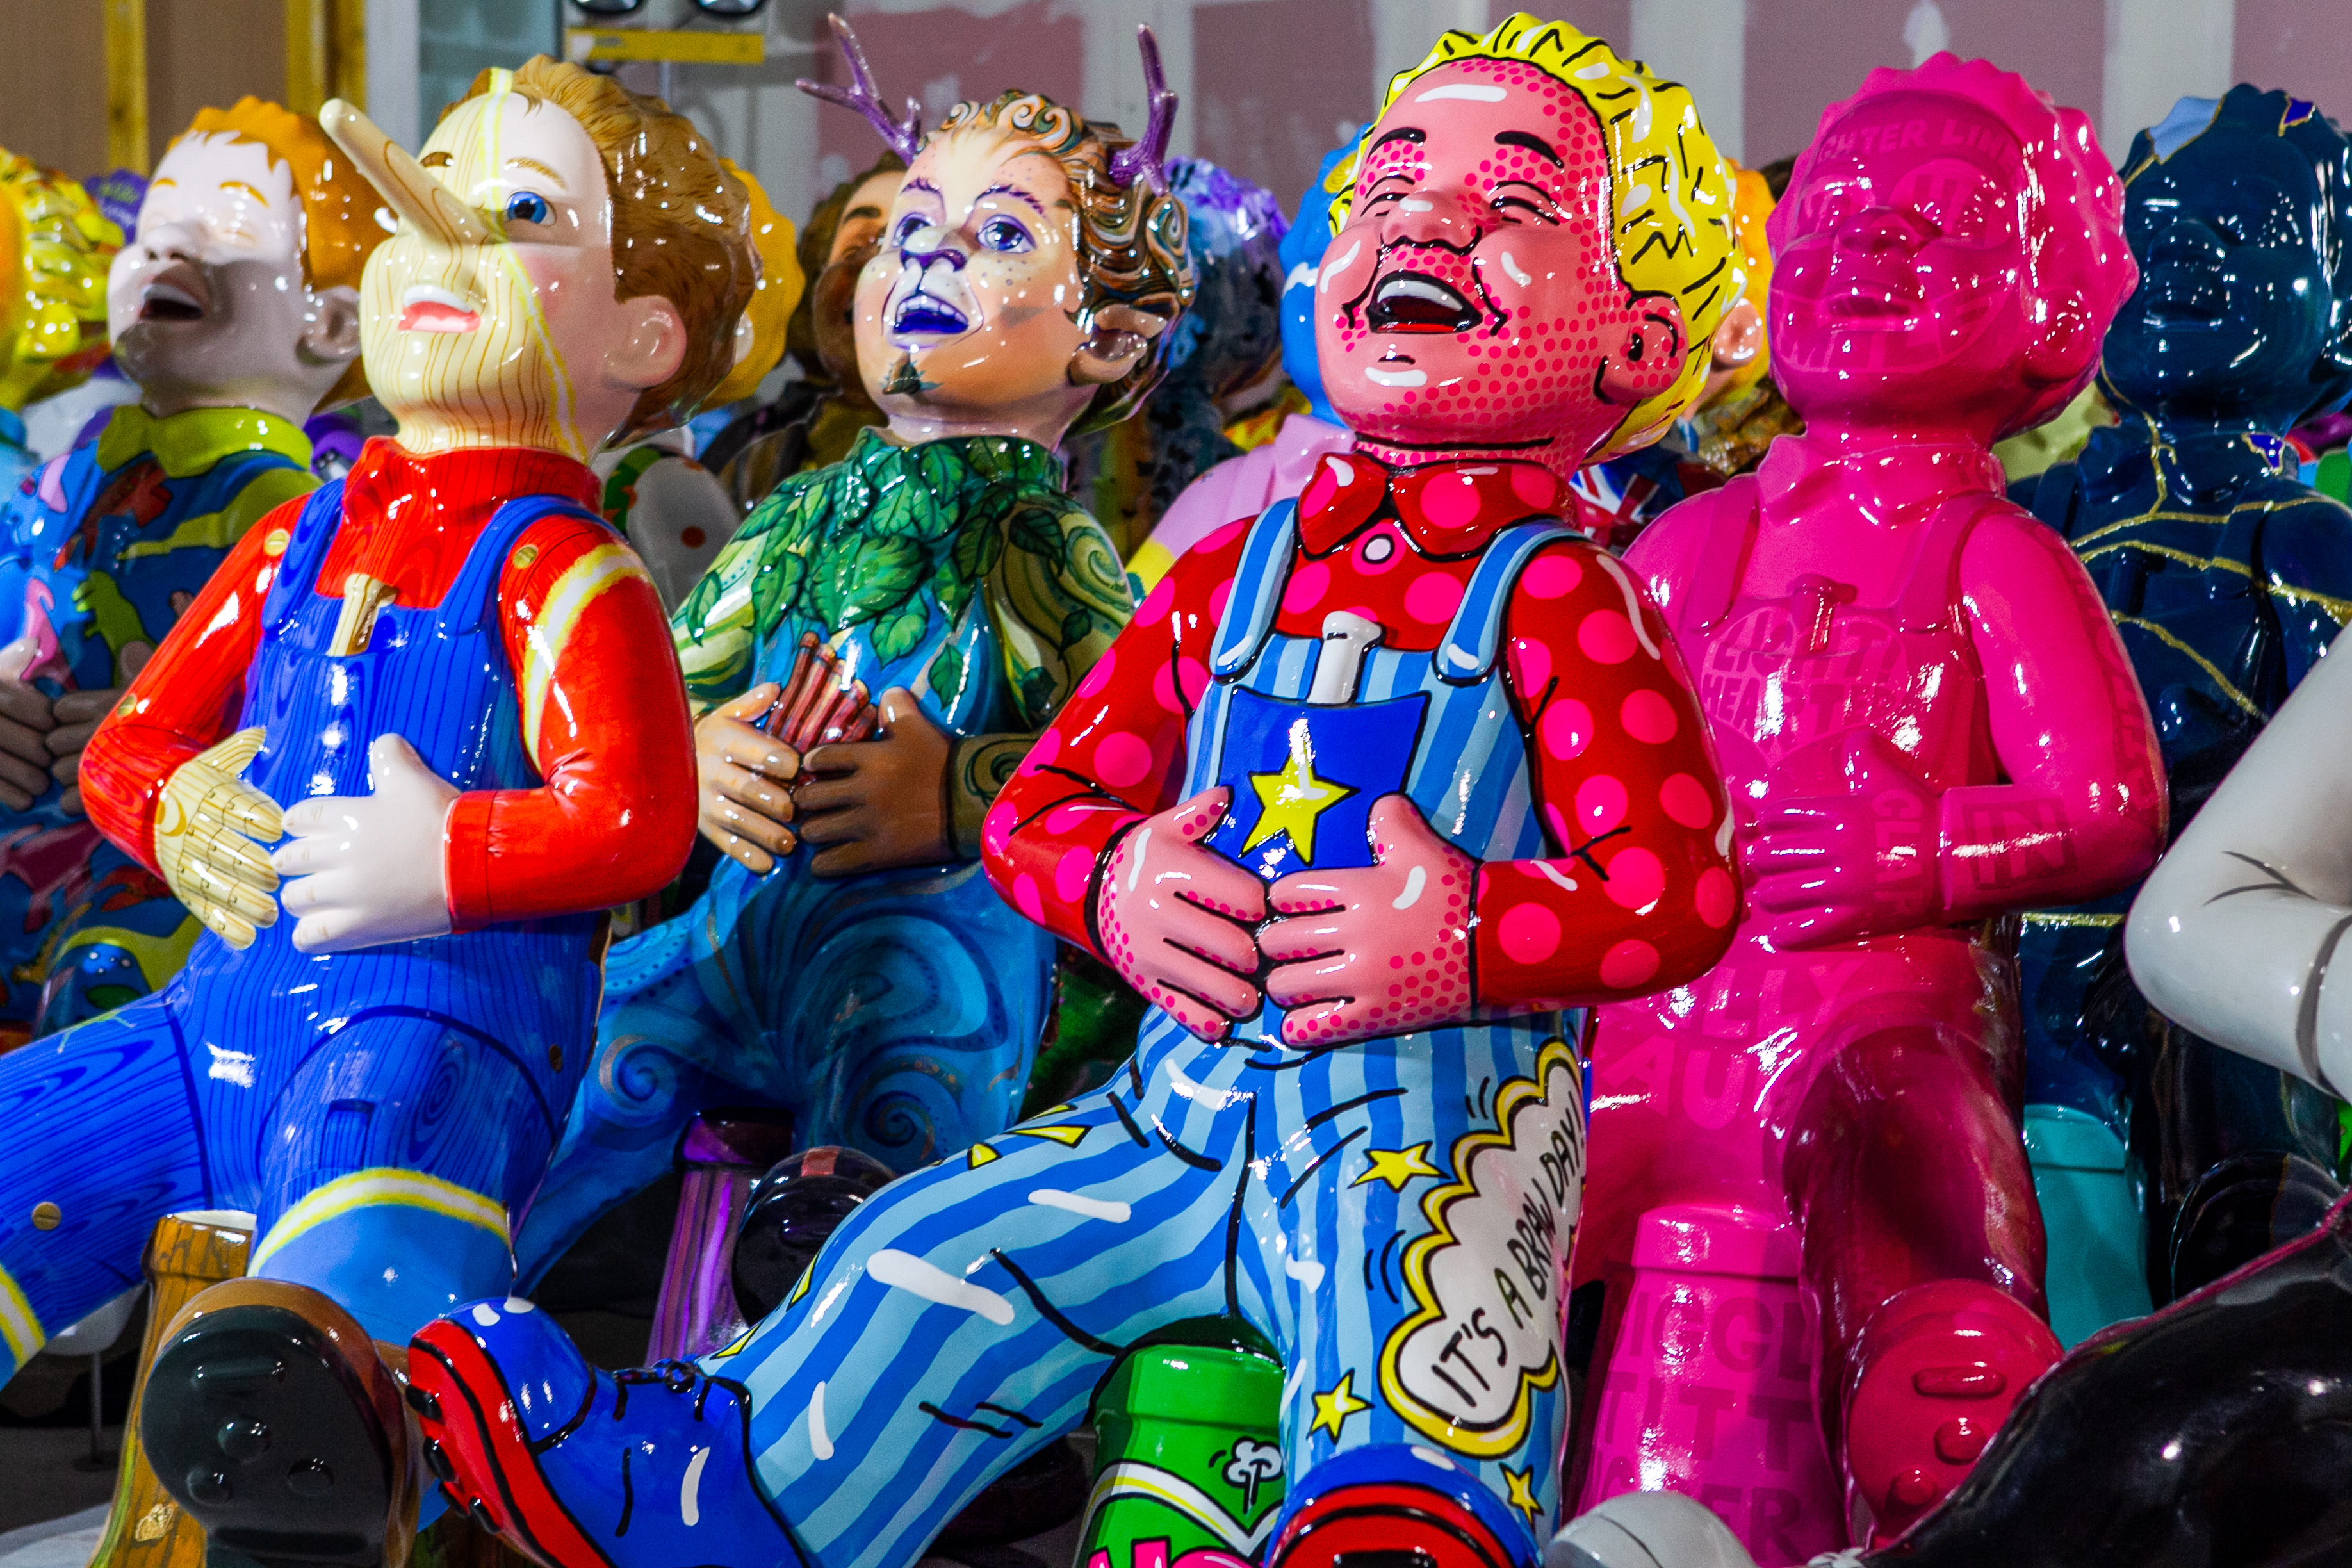 Oor Wullie's BIG Bucket Trail statues will go to auction this week to raise money for Scotland's children's hospital charities.